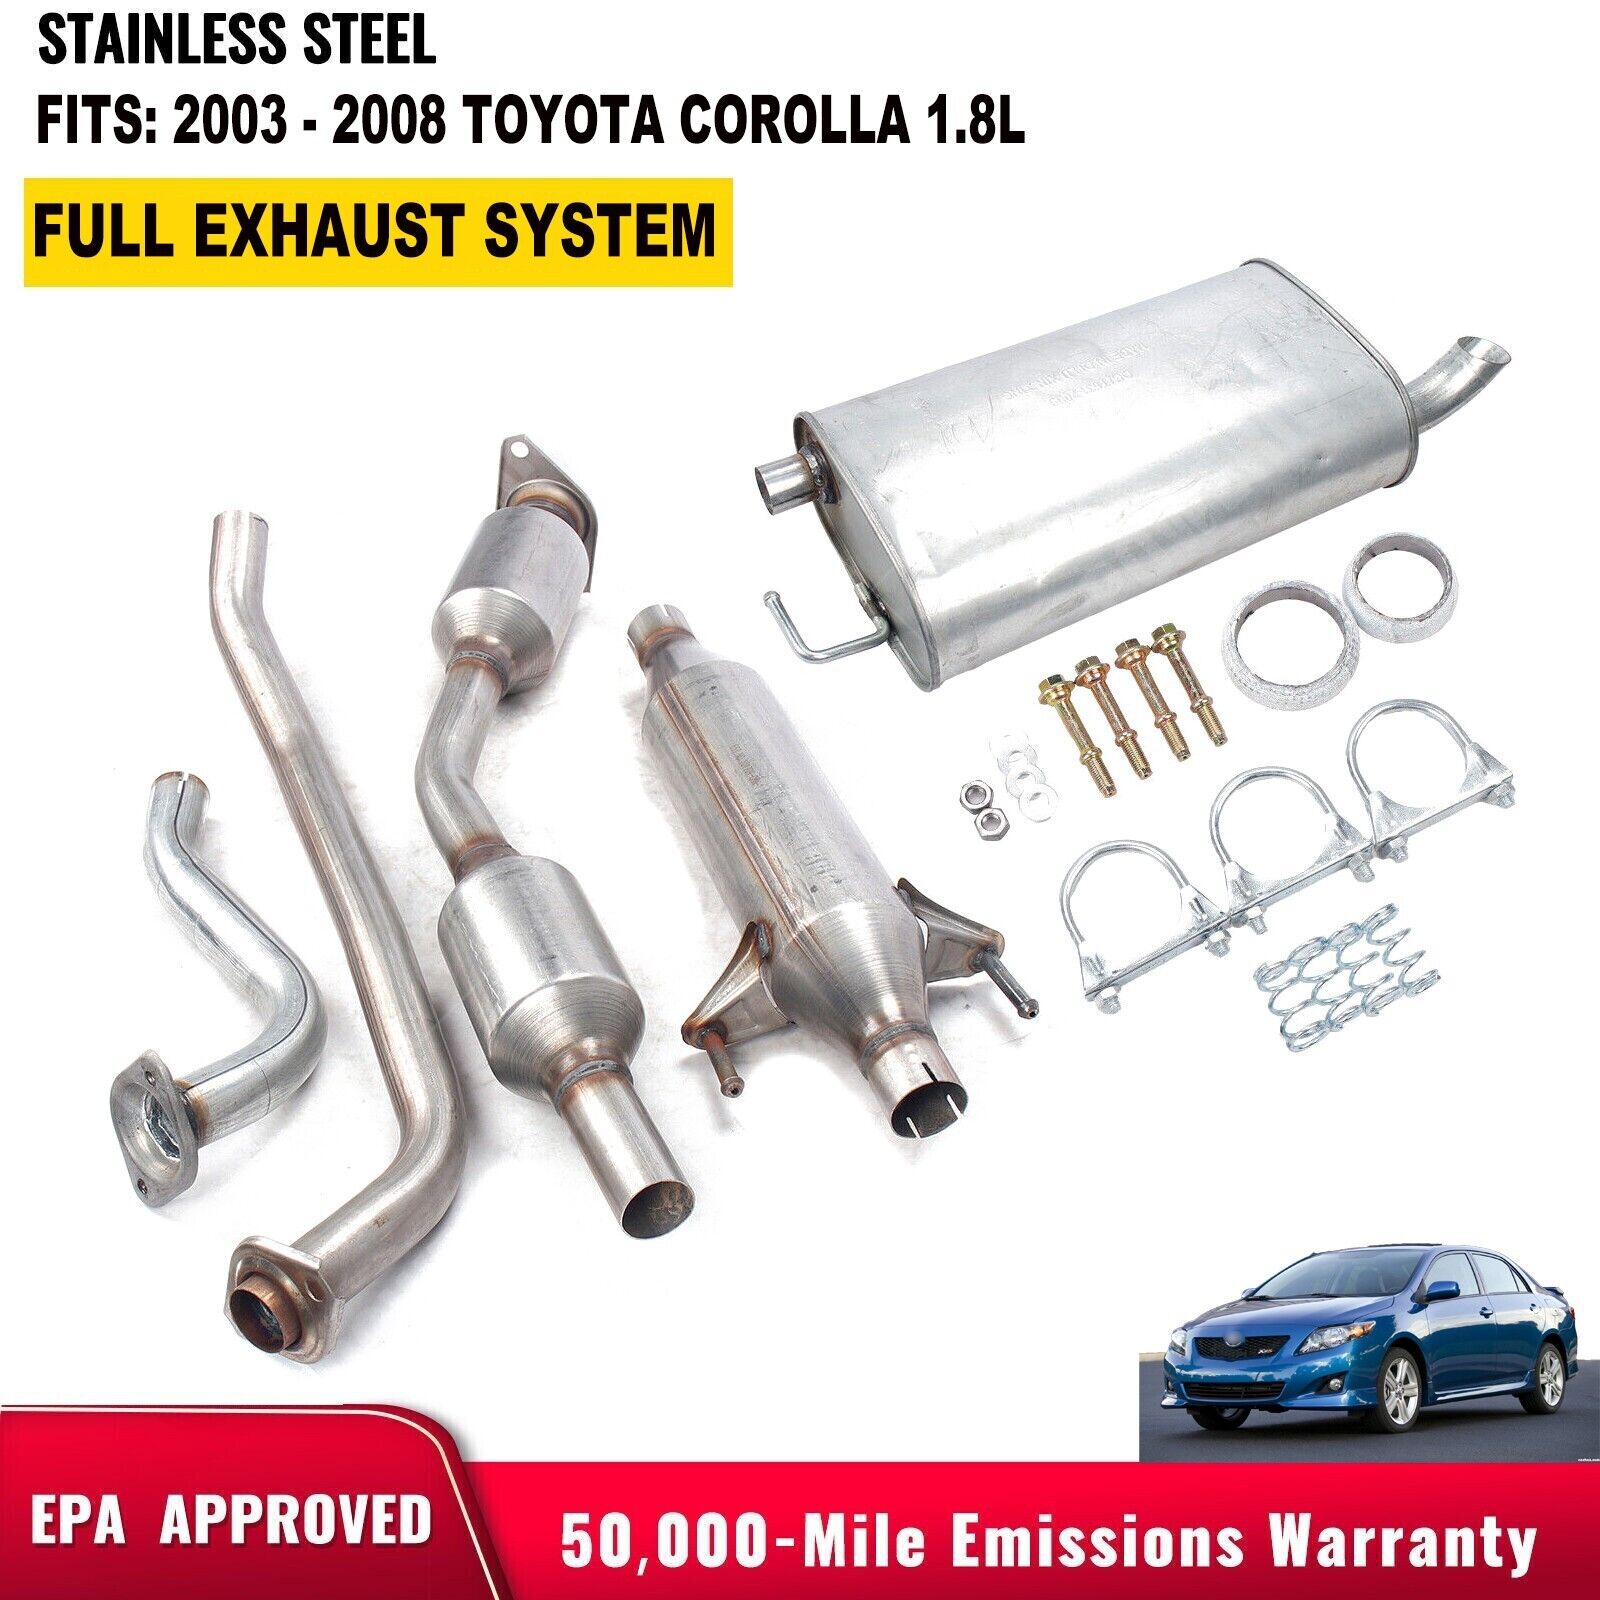 FITS: 2003 - 2008 TOYOTA COROLLA FULL EXHAUST SYSTEM 1.8L